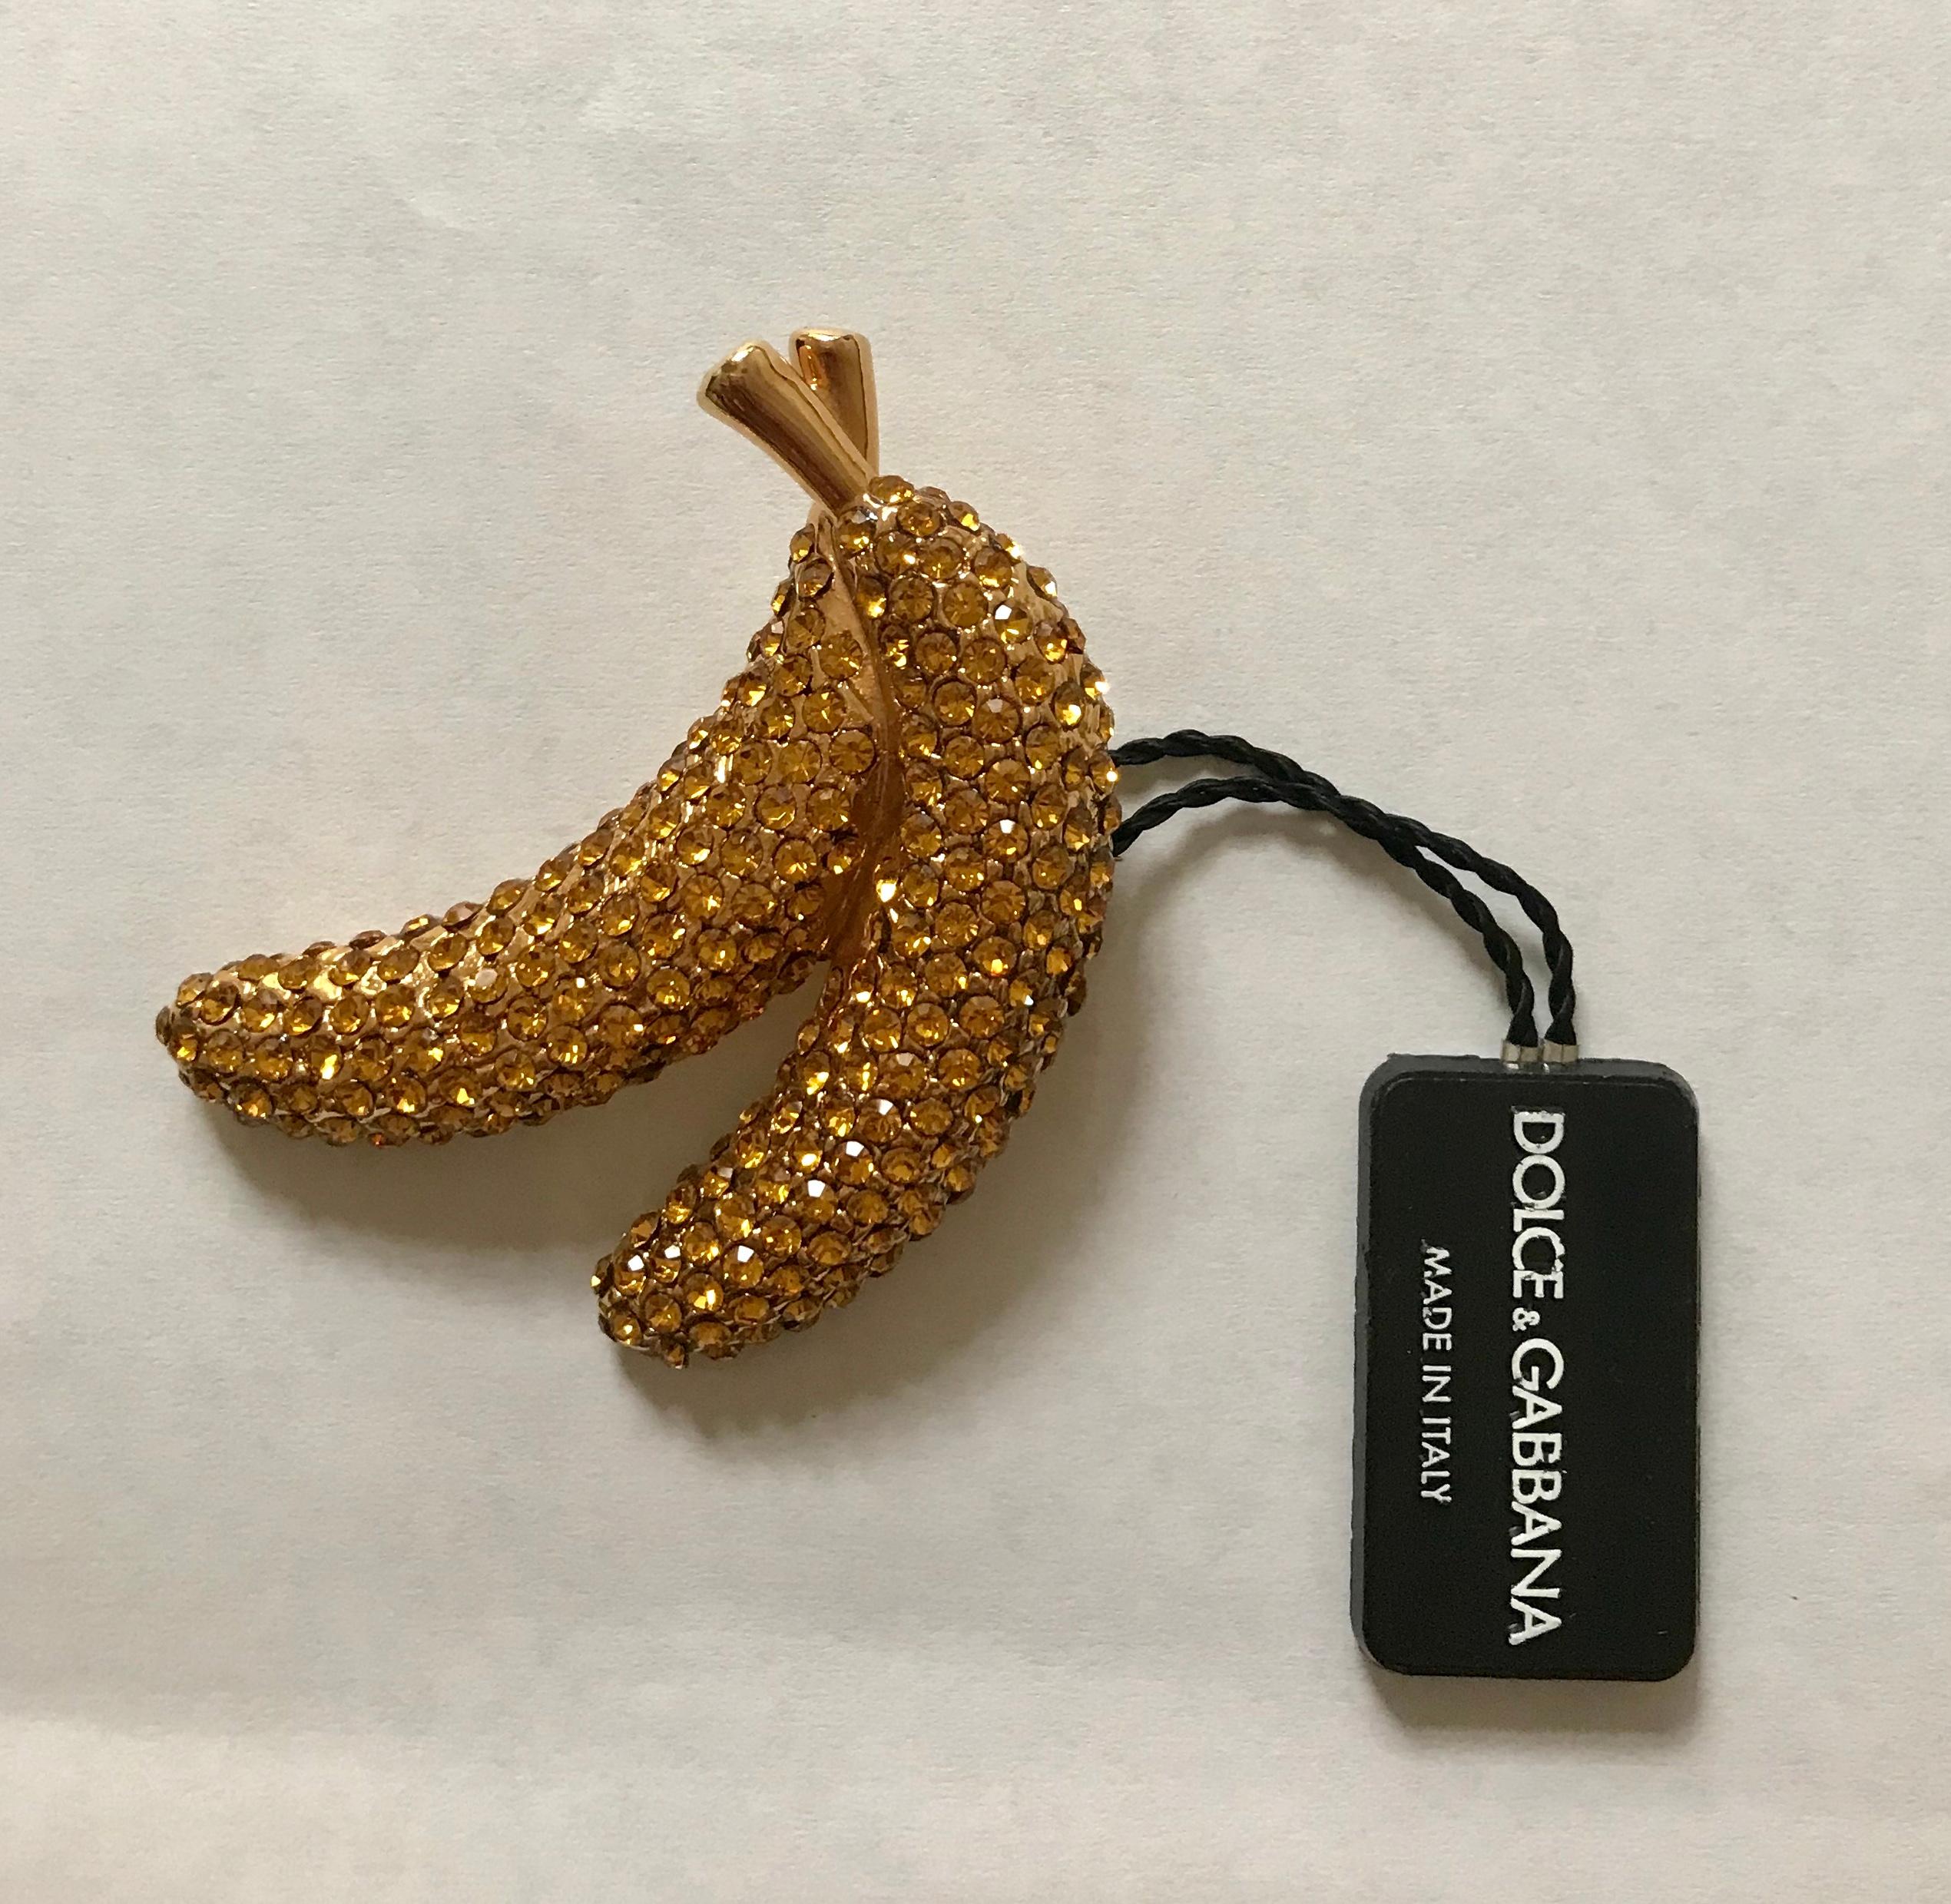 Dolce and Gabbana gold tone Frutti Banana Brooch featuring two bananas covered in dazzling yellow crystals. Signed 'Dolce and Gabbana' at back. 

Includes box and authenticity card.

Crystal/Brass.

Approximately 2.5